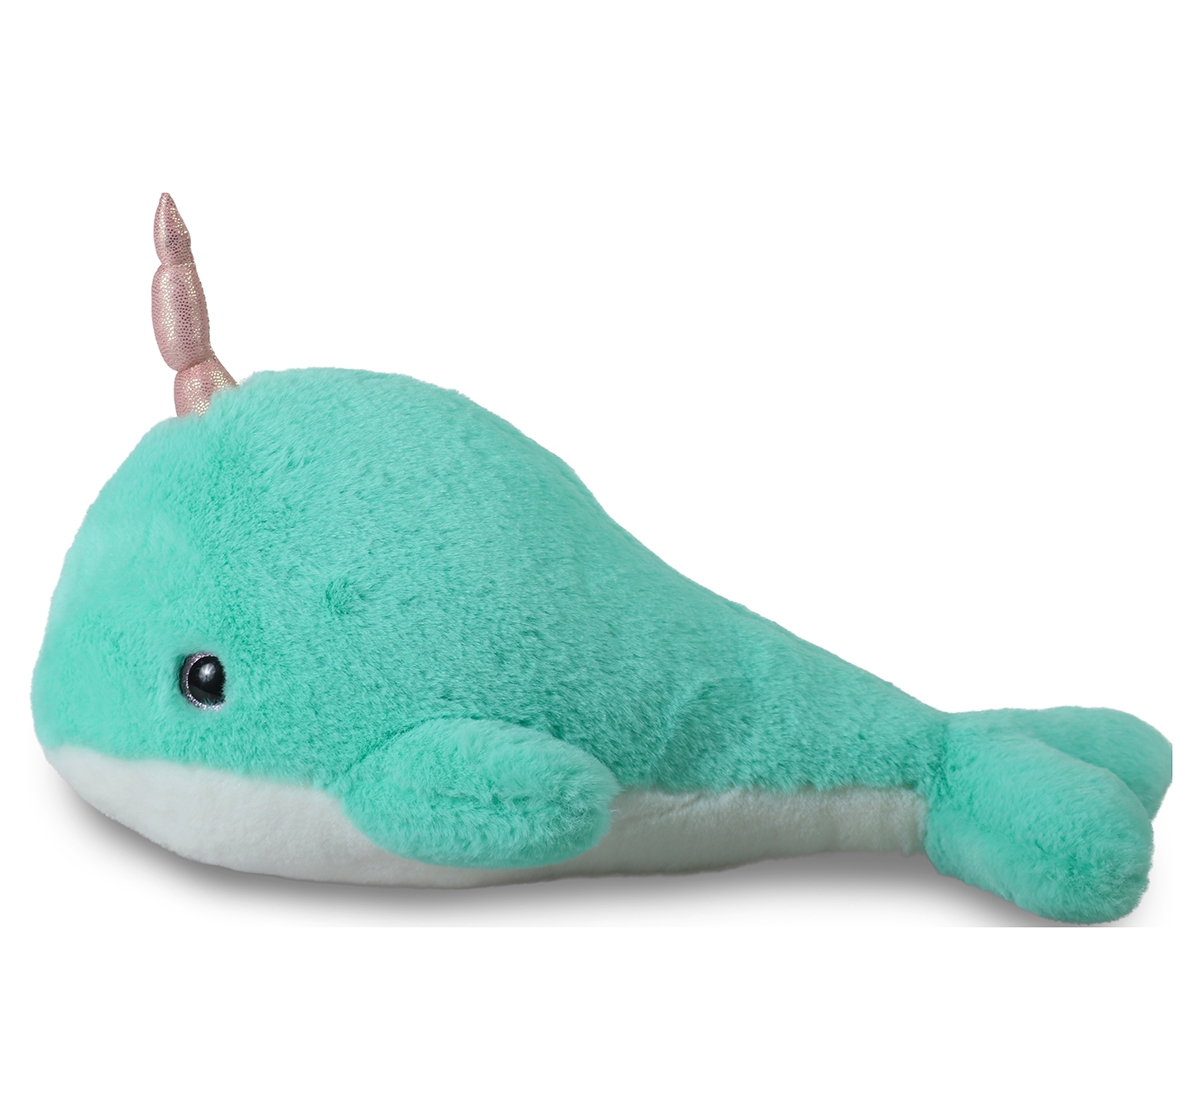 Adorable Stuffed Plush Narwhal by Mirada, Soft Toys for Kids of All Ages, 3Y+, Green, 40cm